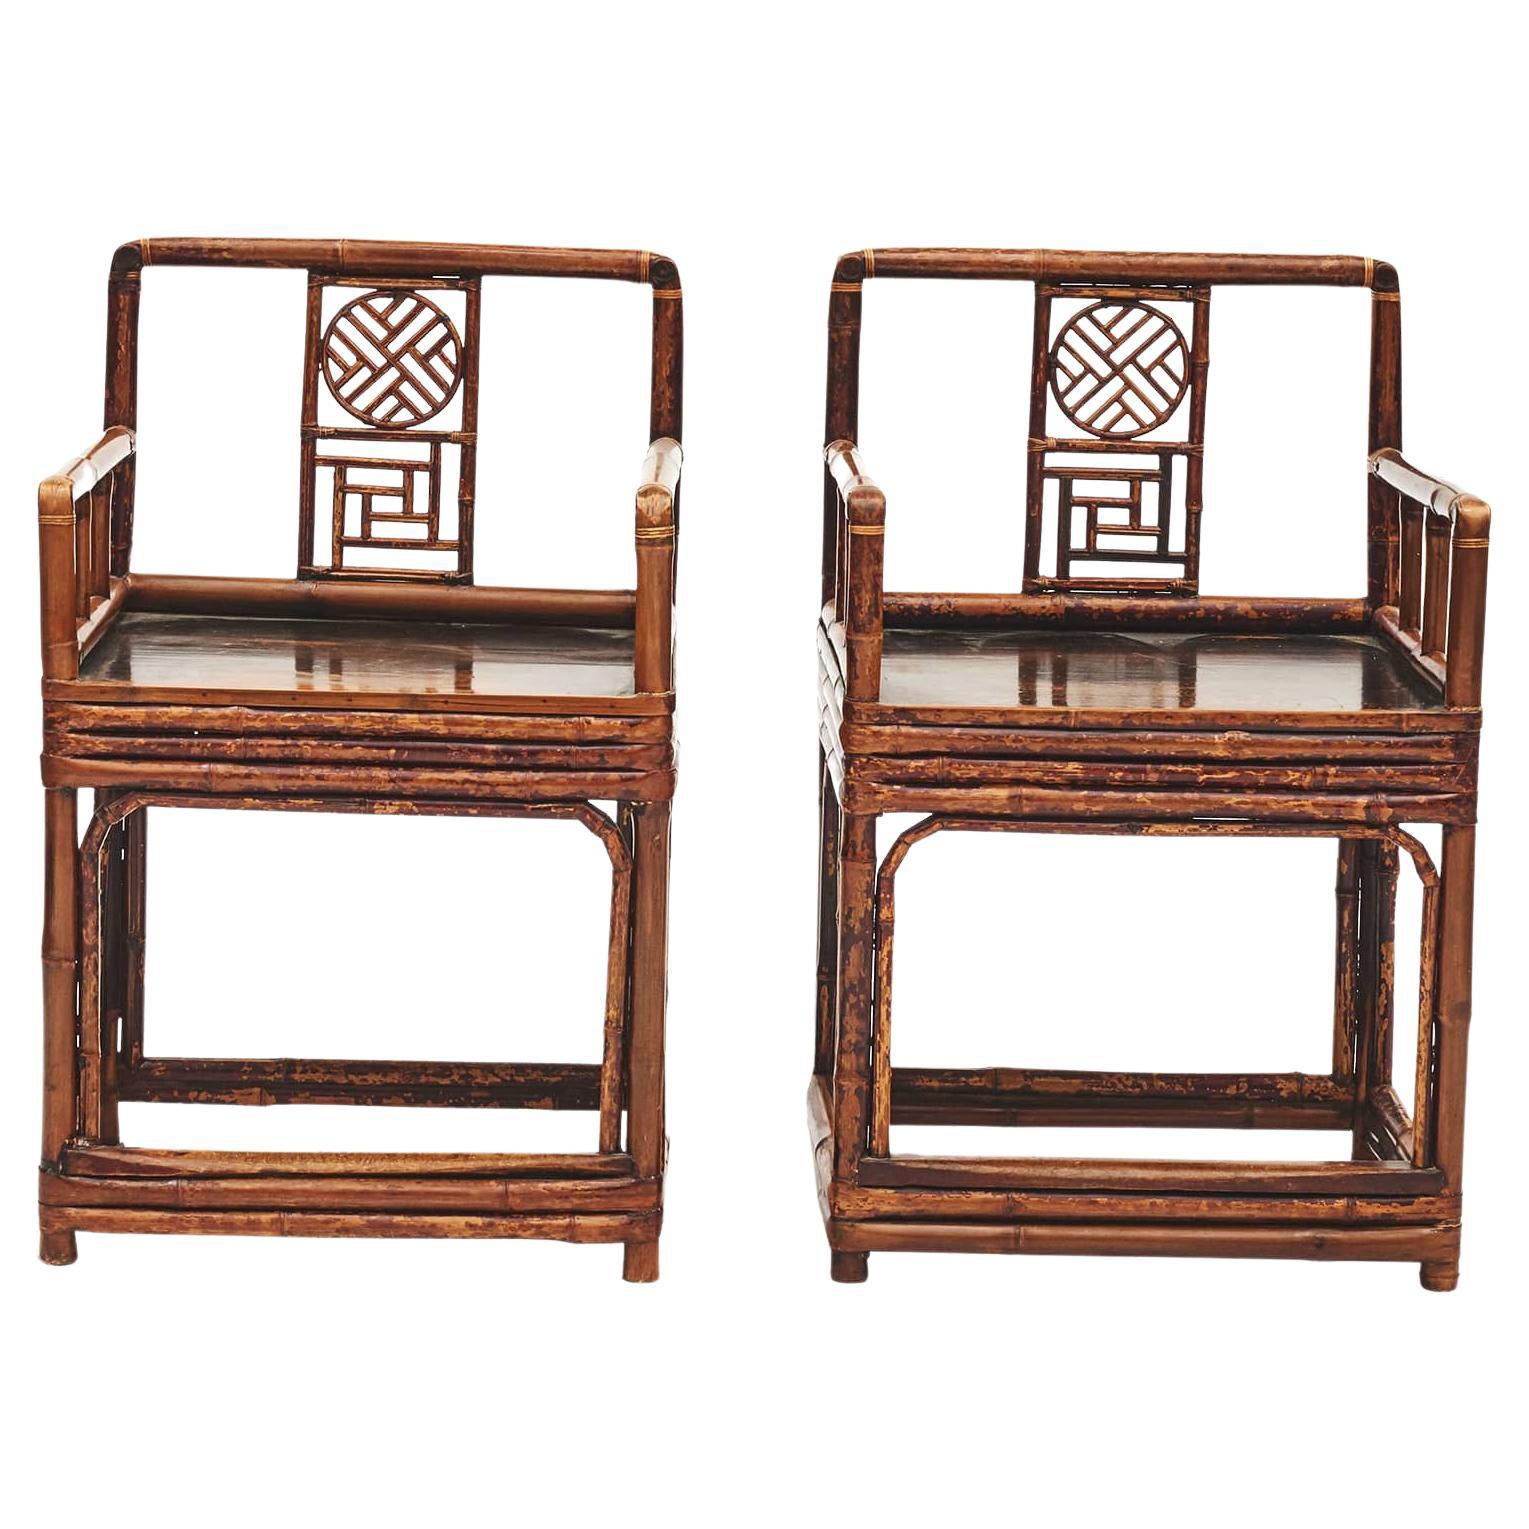 Pair of Antique 19th Century Chinese Bamboo Arm Chairs